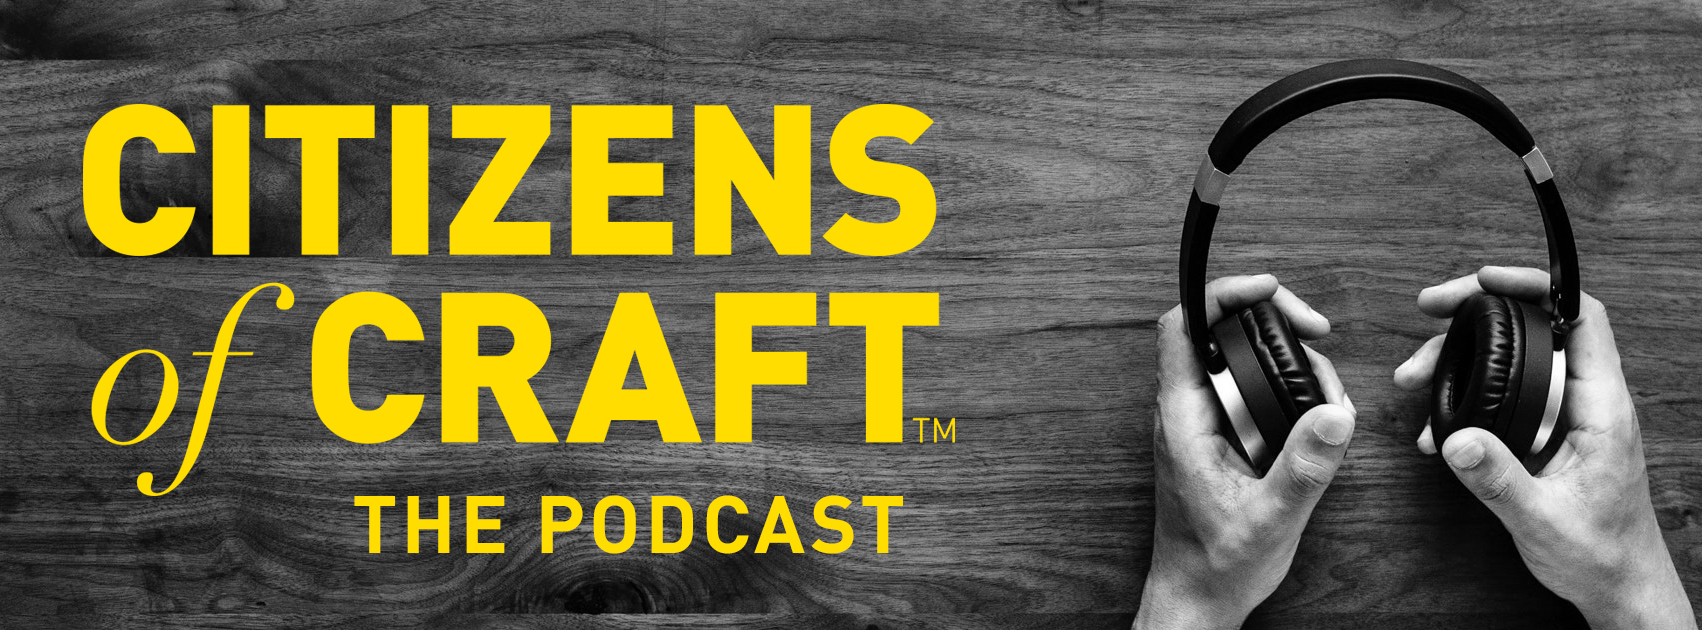 Citizens of Craft: The Podcast